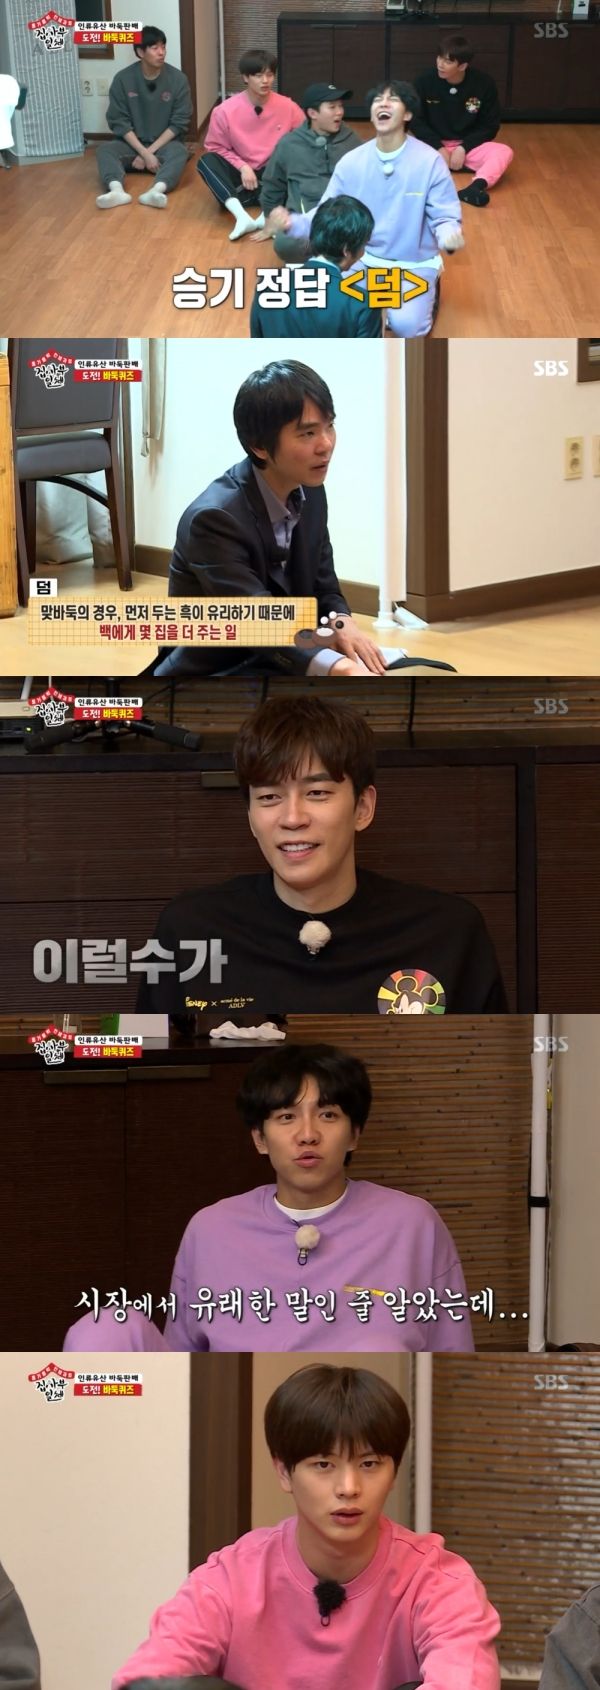 Members unravel Lee Sedols Go QuizOn SBS All The Butlers broadcast on the 15th, members who visited the house of Baduk driver Lee Sedol made Top Model in Baduk quiz.Lee Sedol, the master of the broadcast, gave a Go quiz to the members. Lee Sedol said, This word is used as a Go terminology and is used throughout everyday life.It is a little more than my value. Lee Seung-gi shouted the right answer, saying dum, and Lee Sedol explained, The person who puts it first gives me a bonus.Lee Seung-gi I thought it was a term used in the market, and Yook Sungjae admired it, saying, Baduk terms are right.Yook Sungjae then became a Baduk quiz Miniforce, shouting a series of Baduk words that ended with Su.